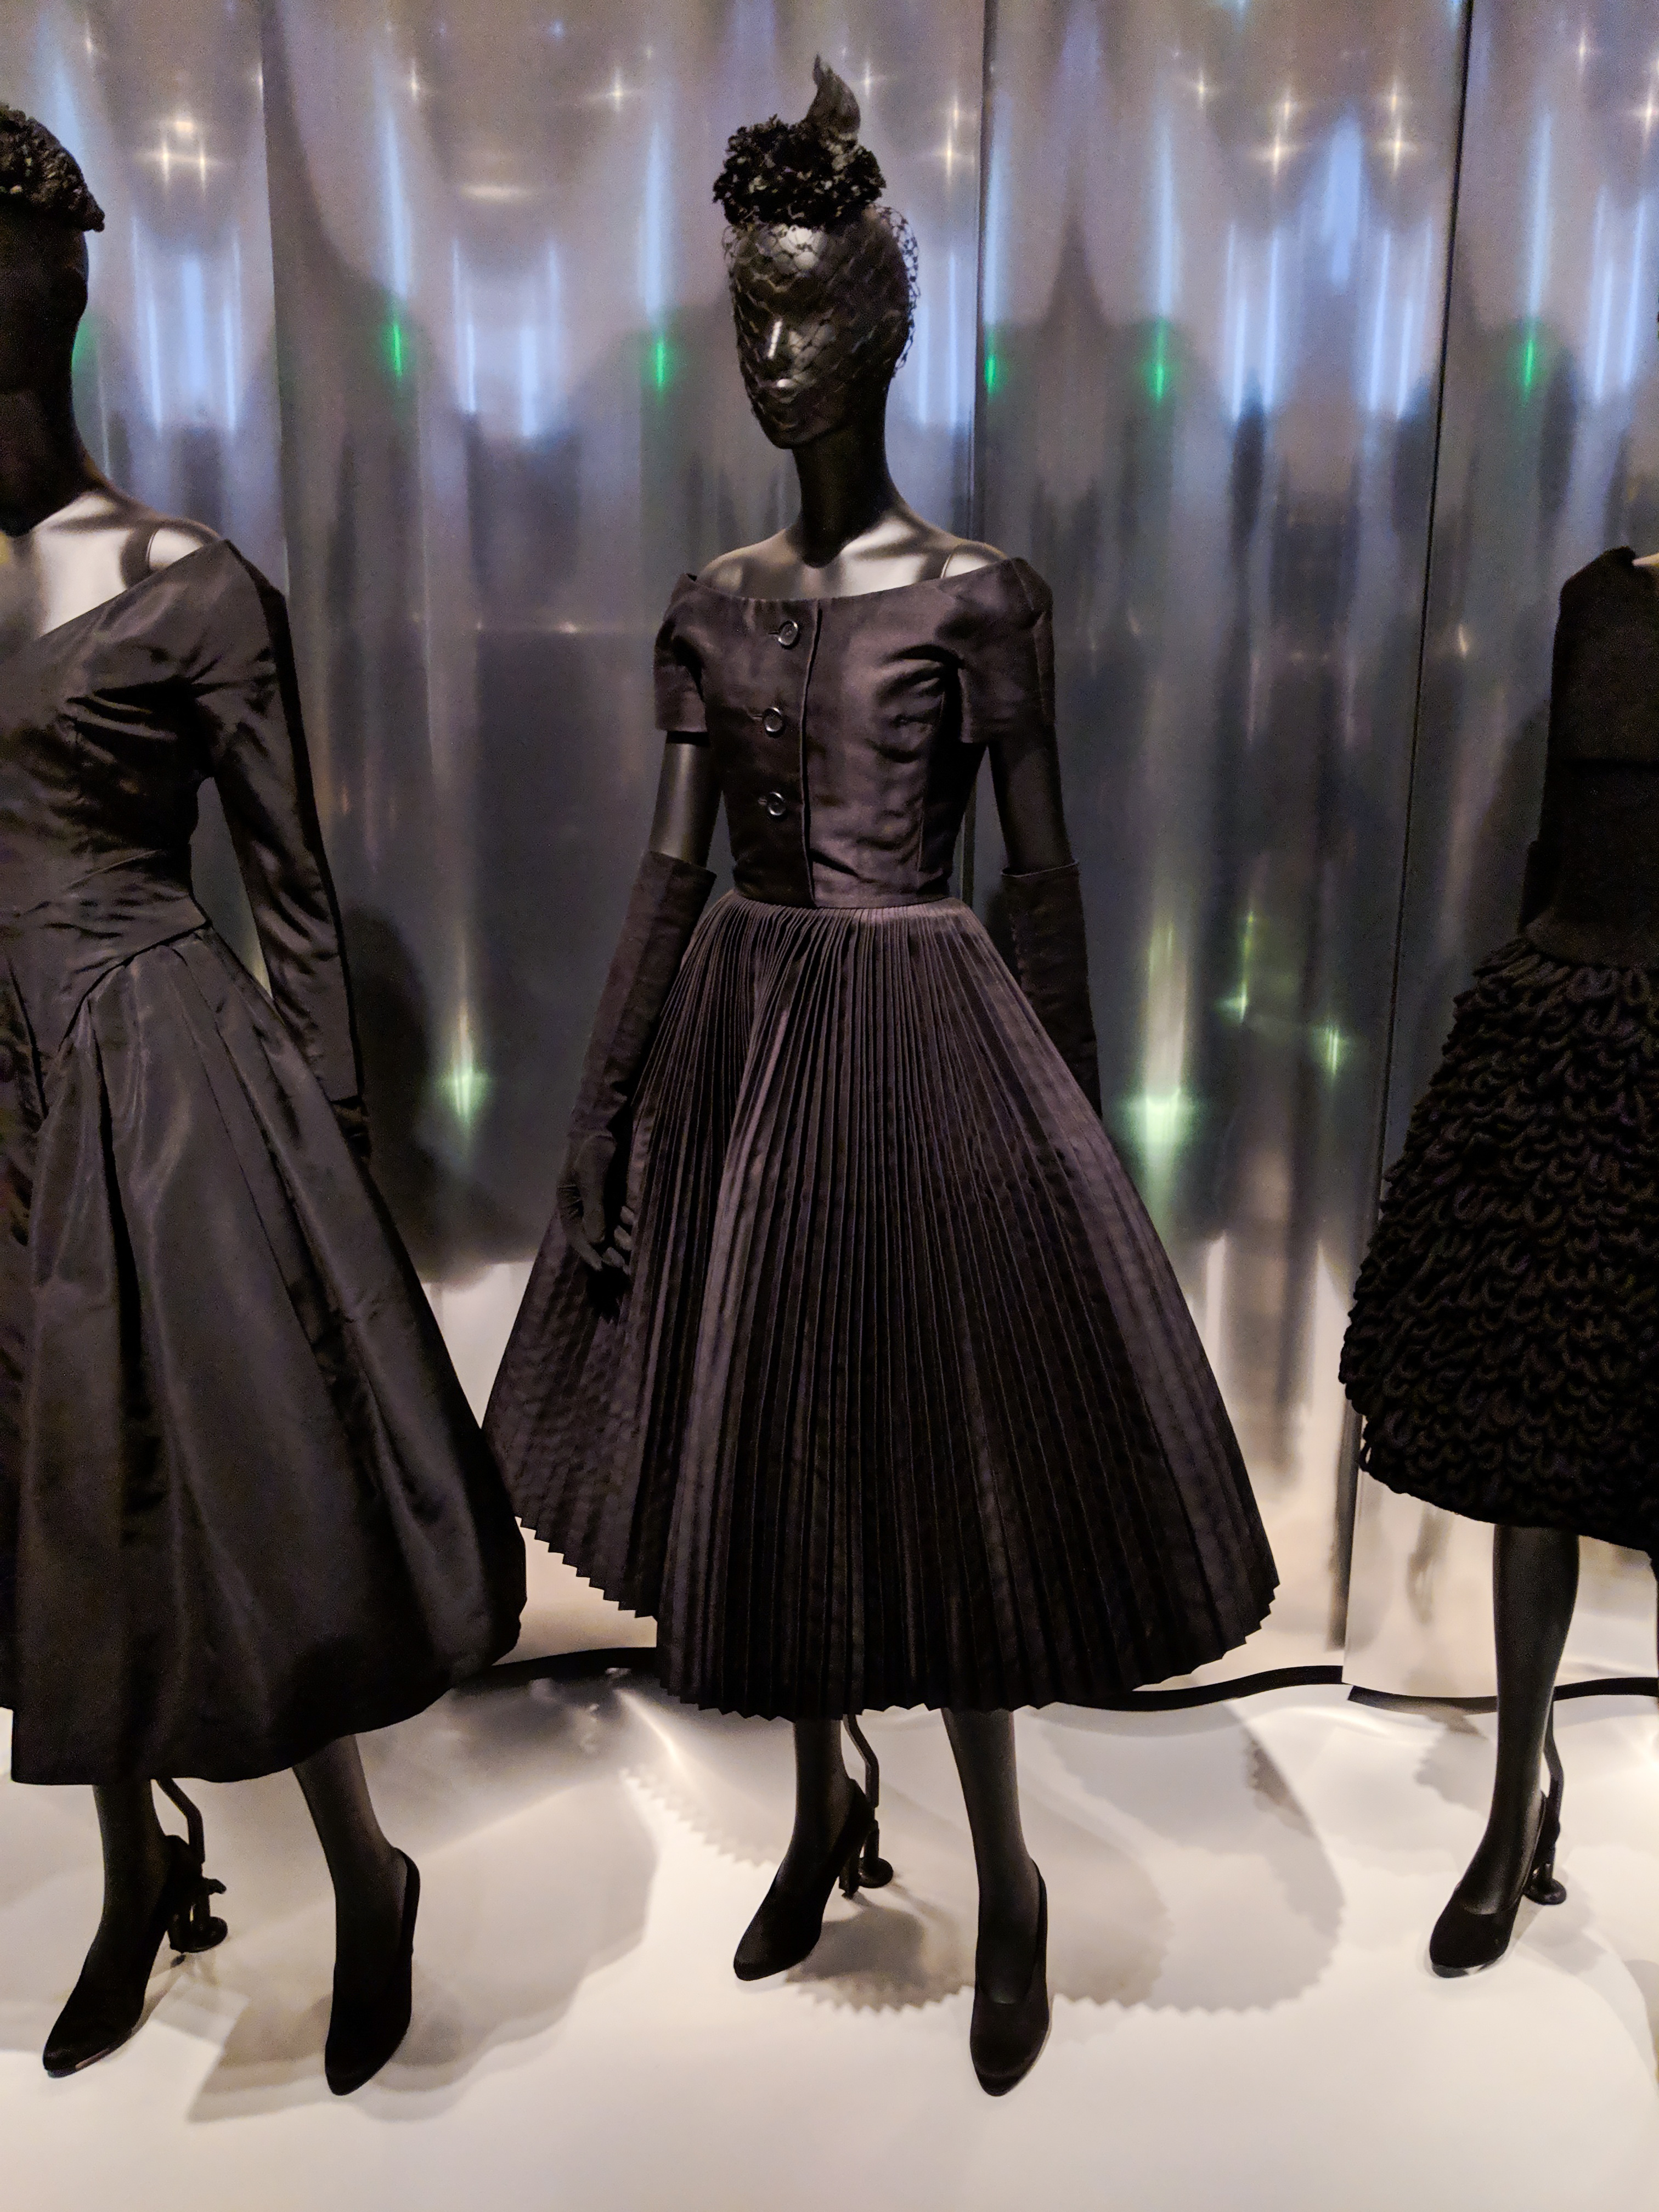 Christian Dior's first collection